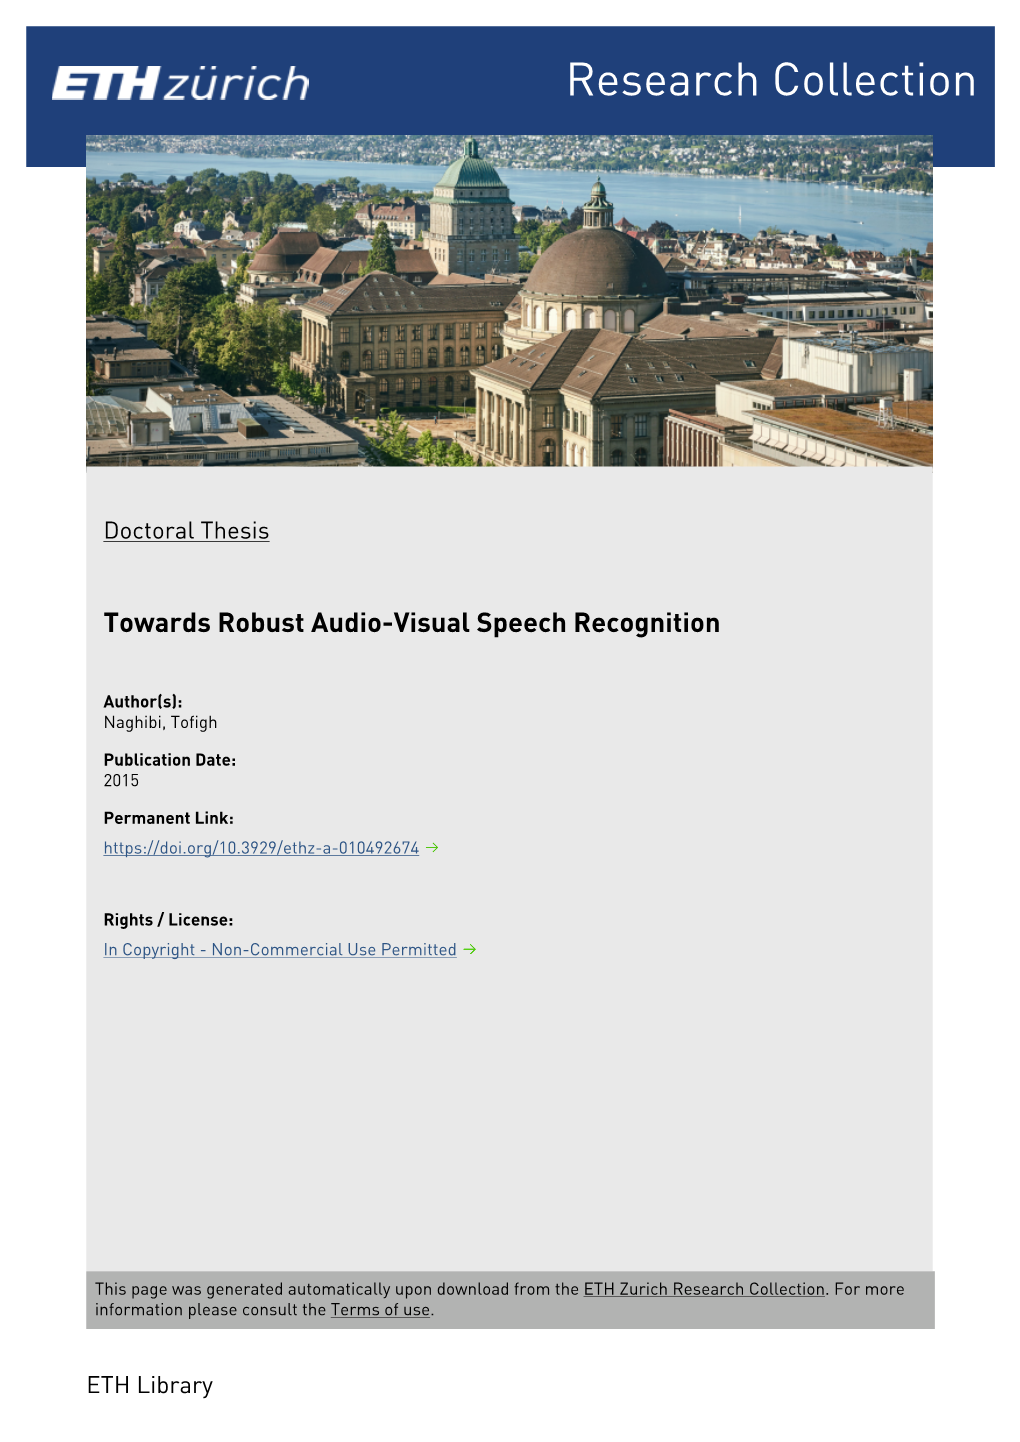 Towards Robust Audio-Visual Speech Recognition